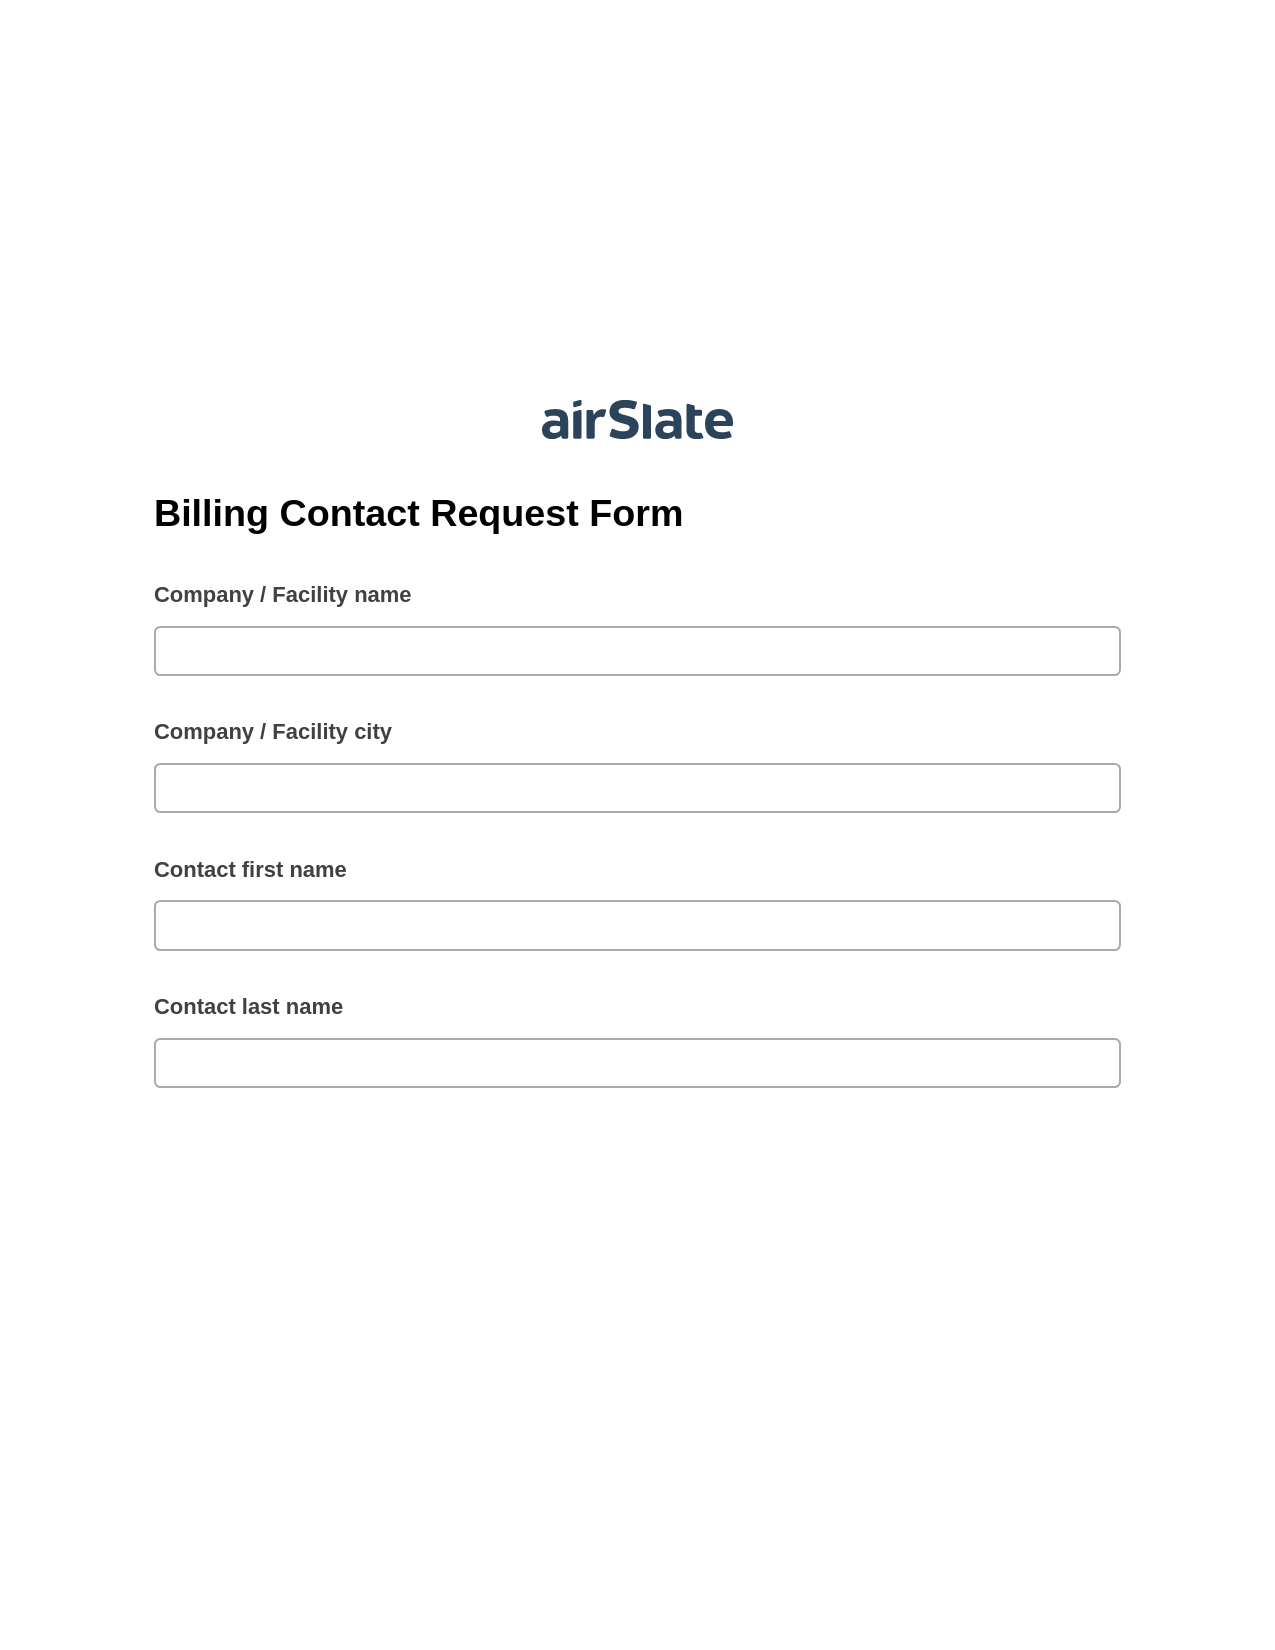 Billing Contact Request Form Pre-fill Slate from MS Dynamics 365 Records Bot, Create slate from another Flow Bot, Export to Excel 365 Bot